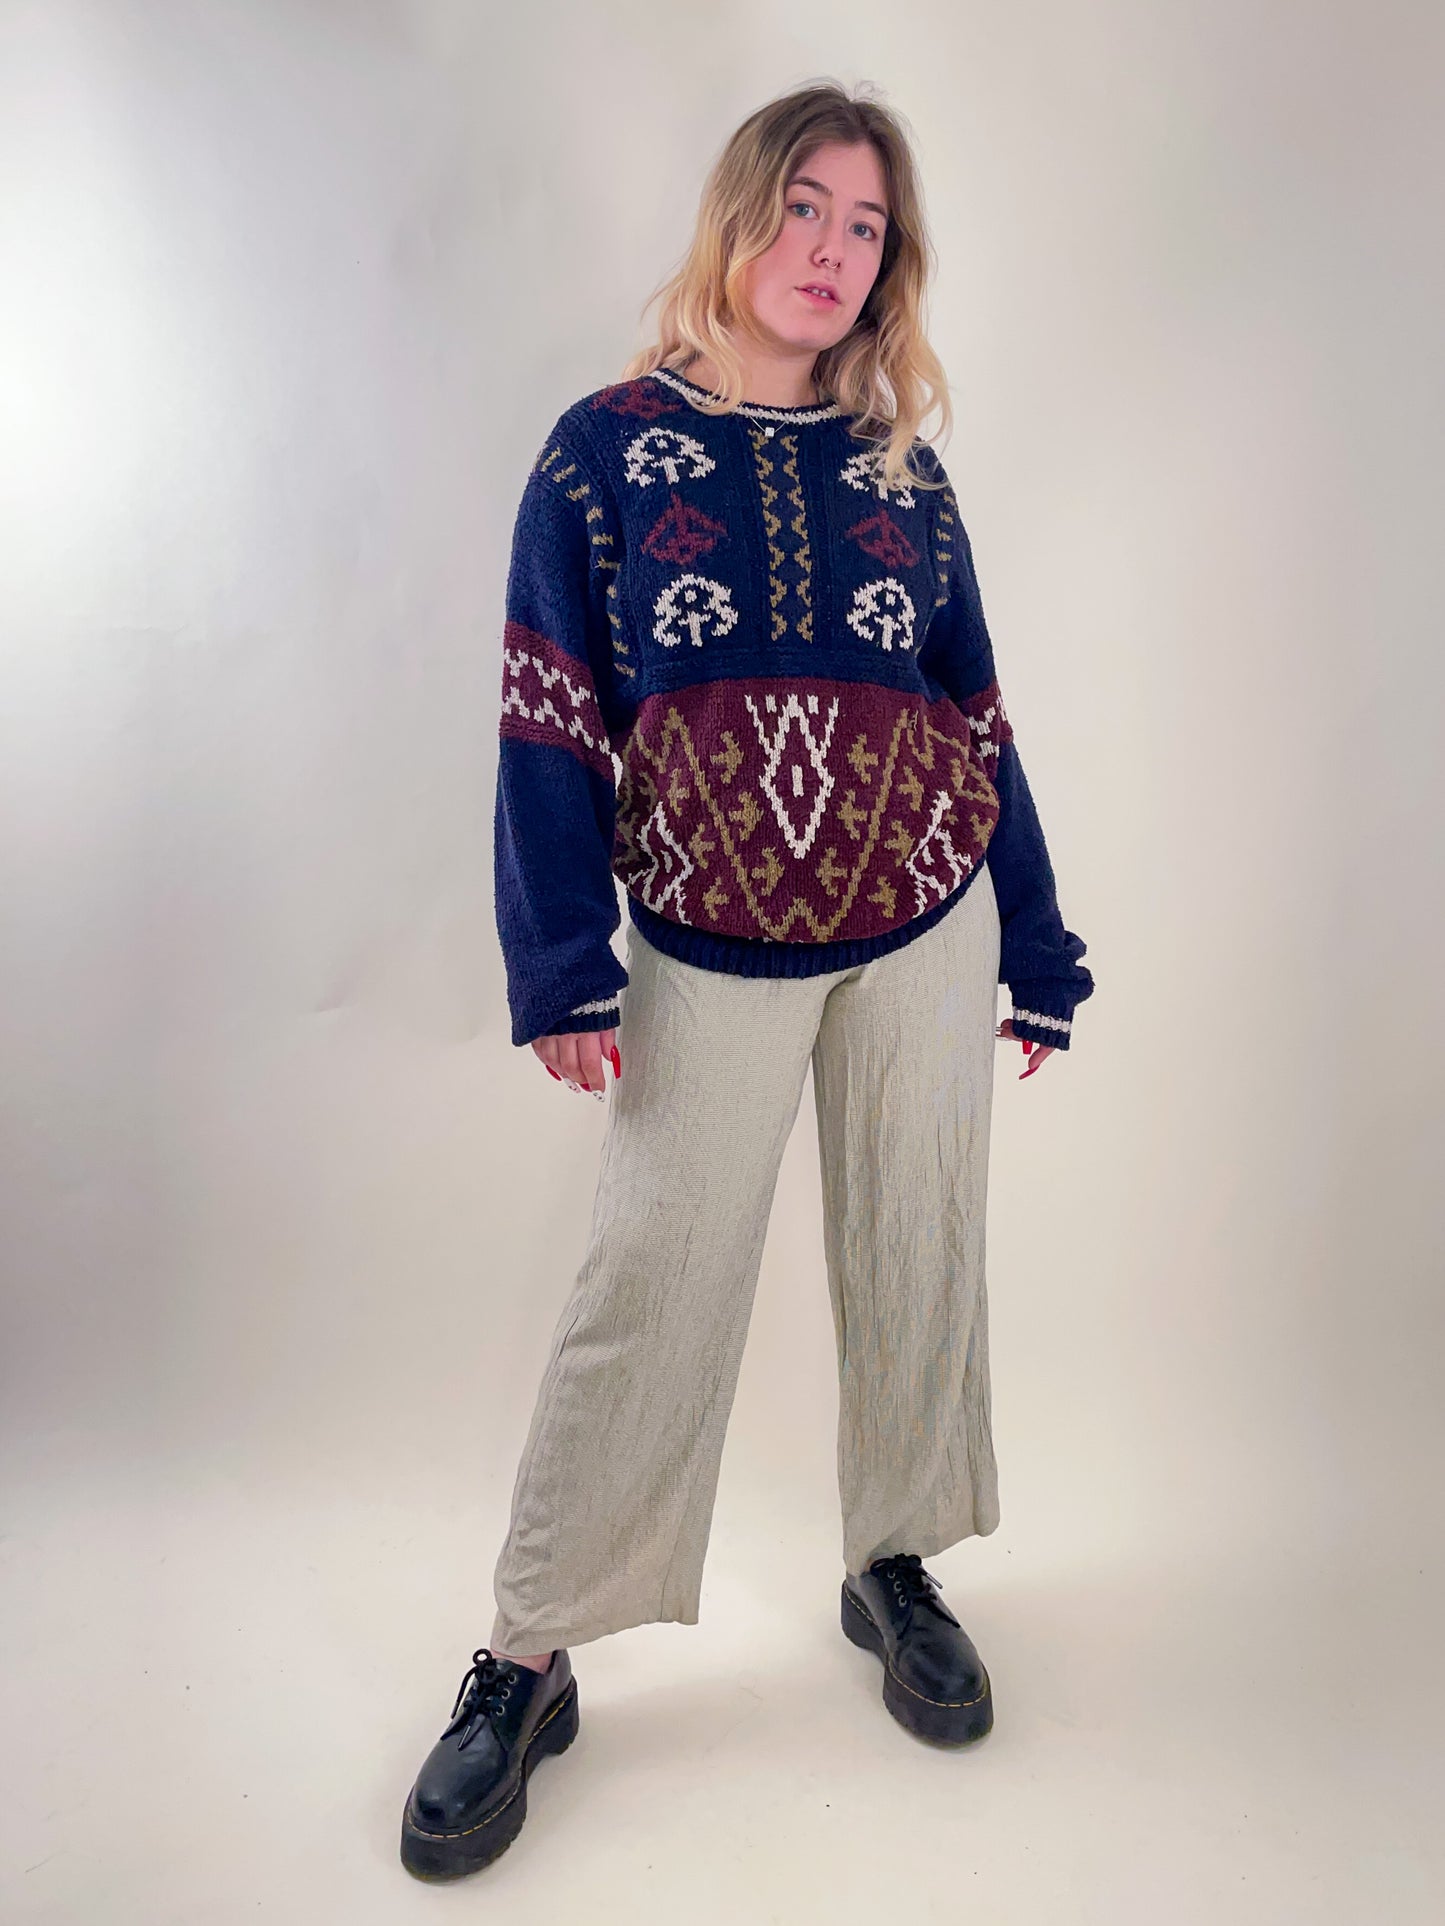 90s Silk Hand Knit Patterned Sweater